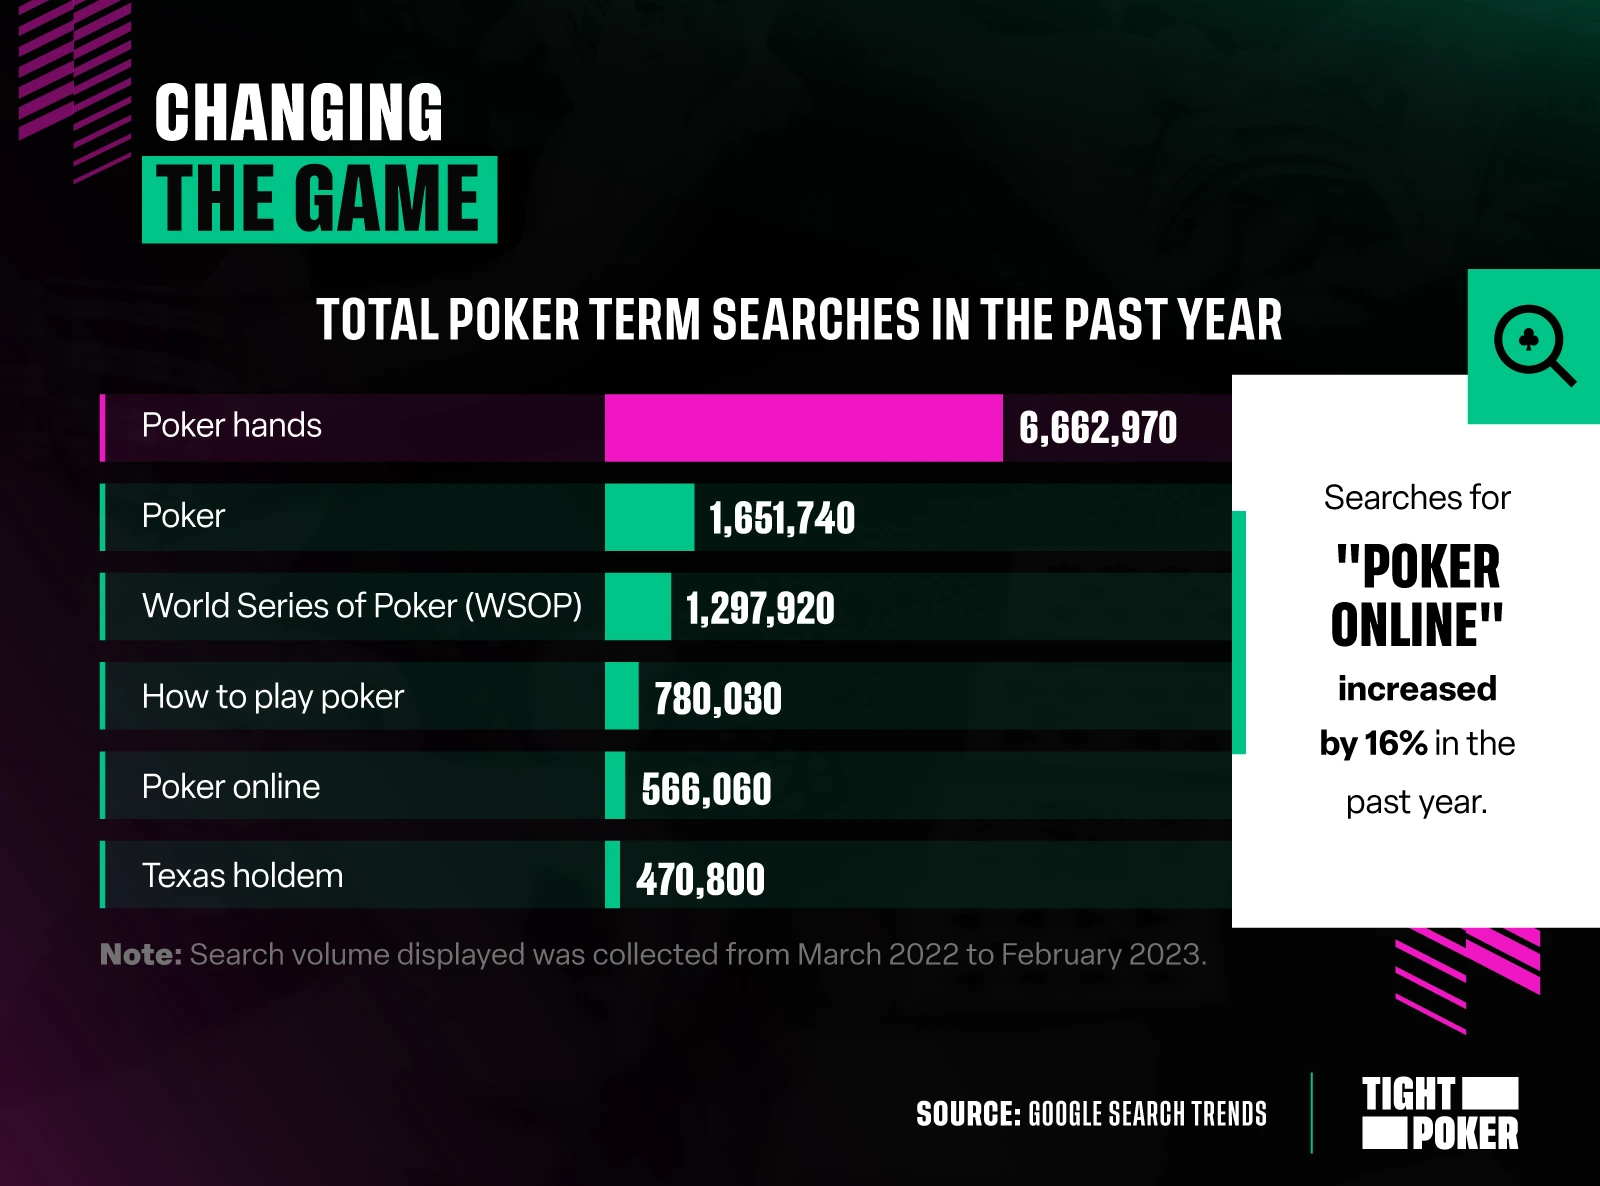 Total Poker Term Searches in the Past Year